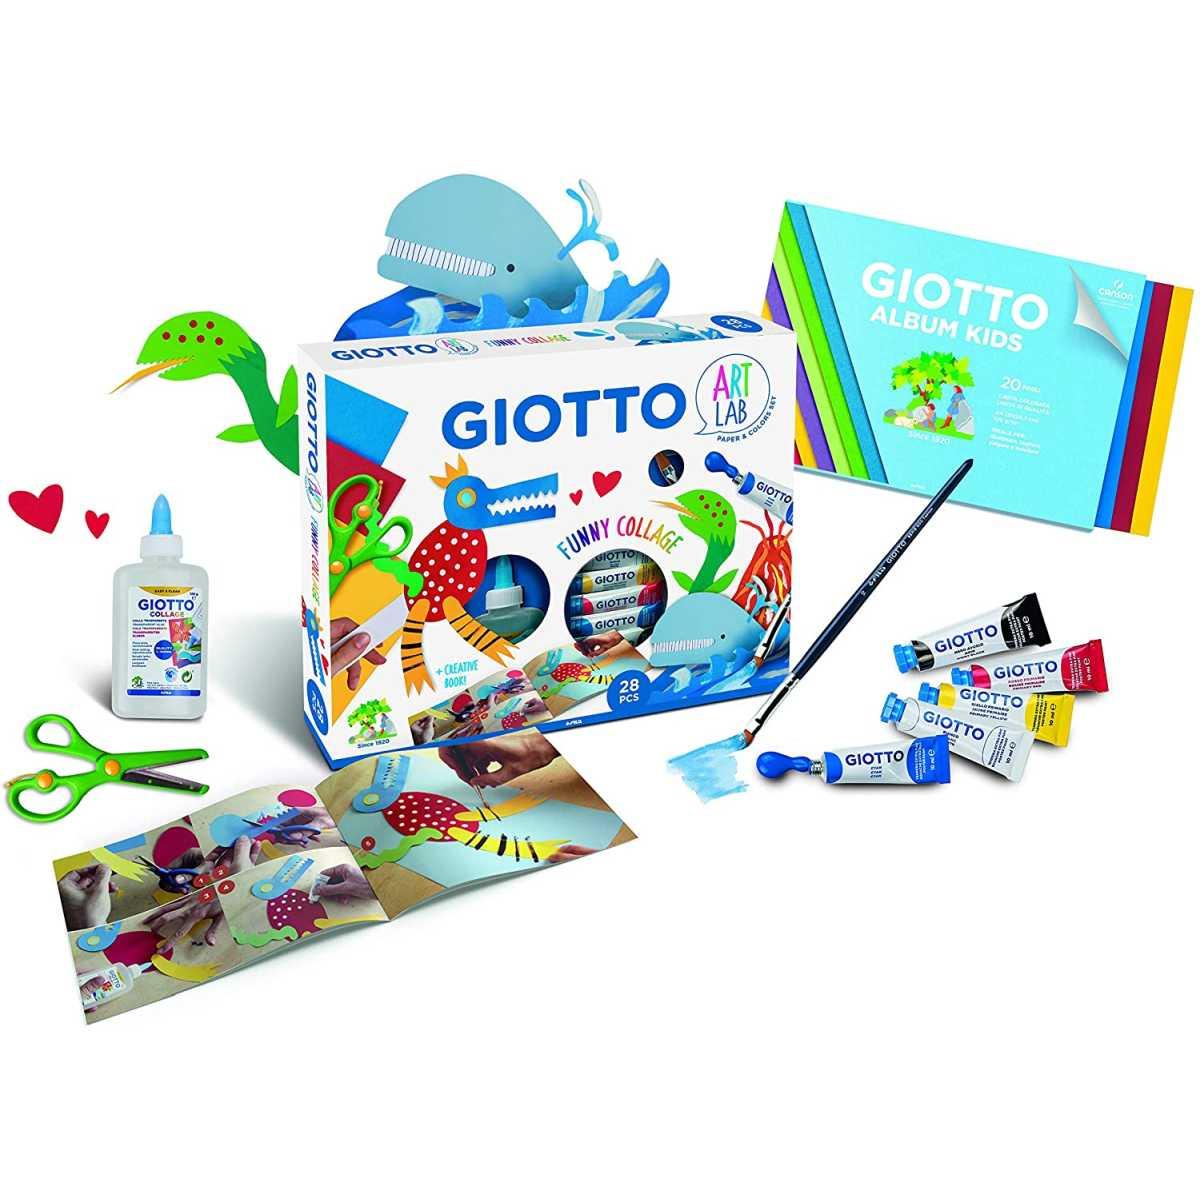 Giotto art lab - paper & colors set - giotto art lab funny collage